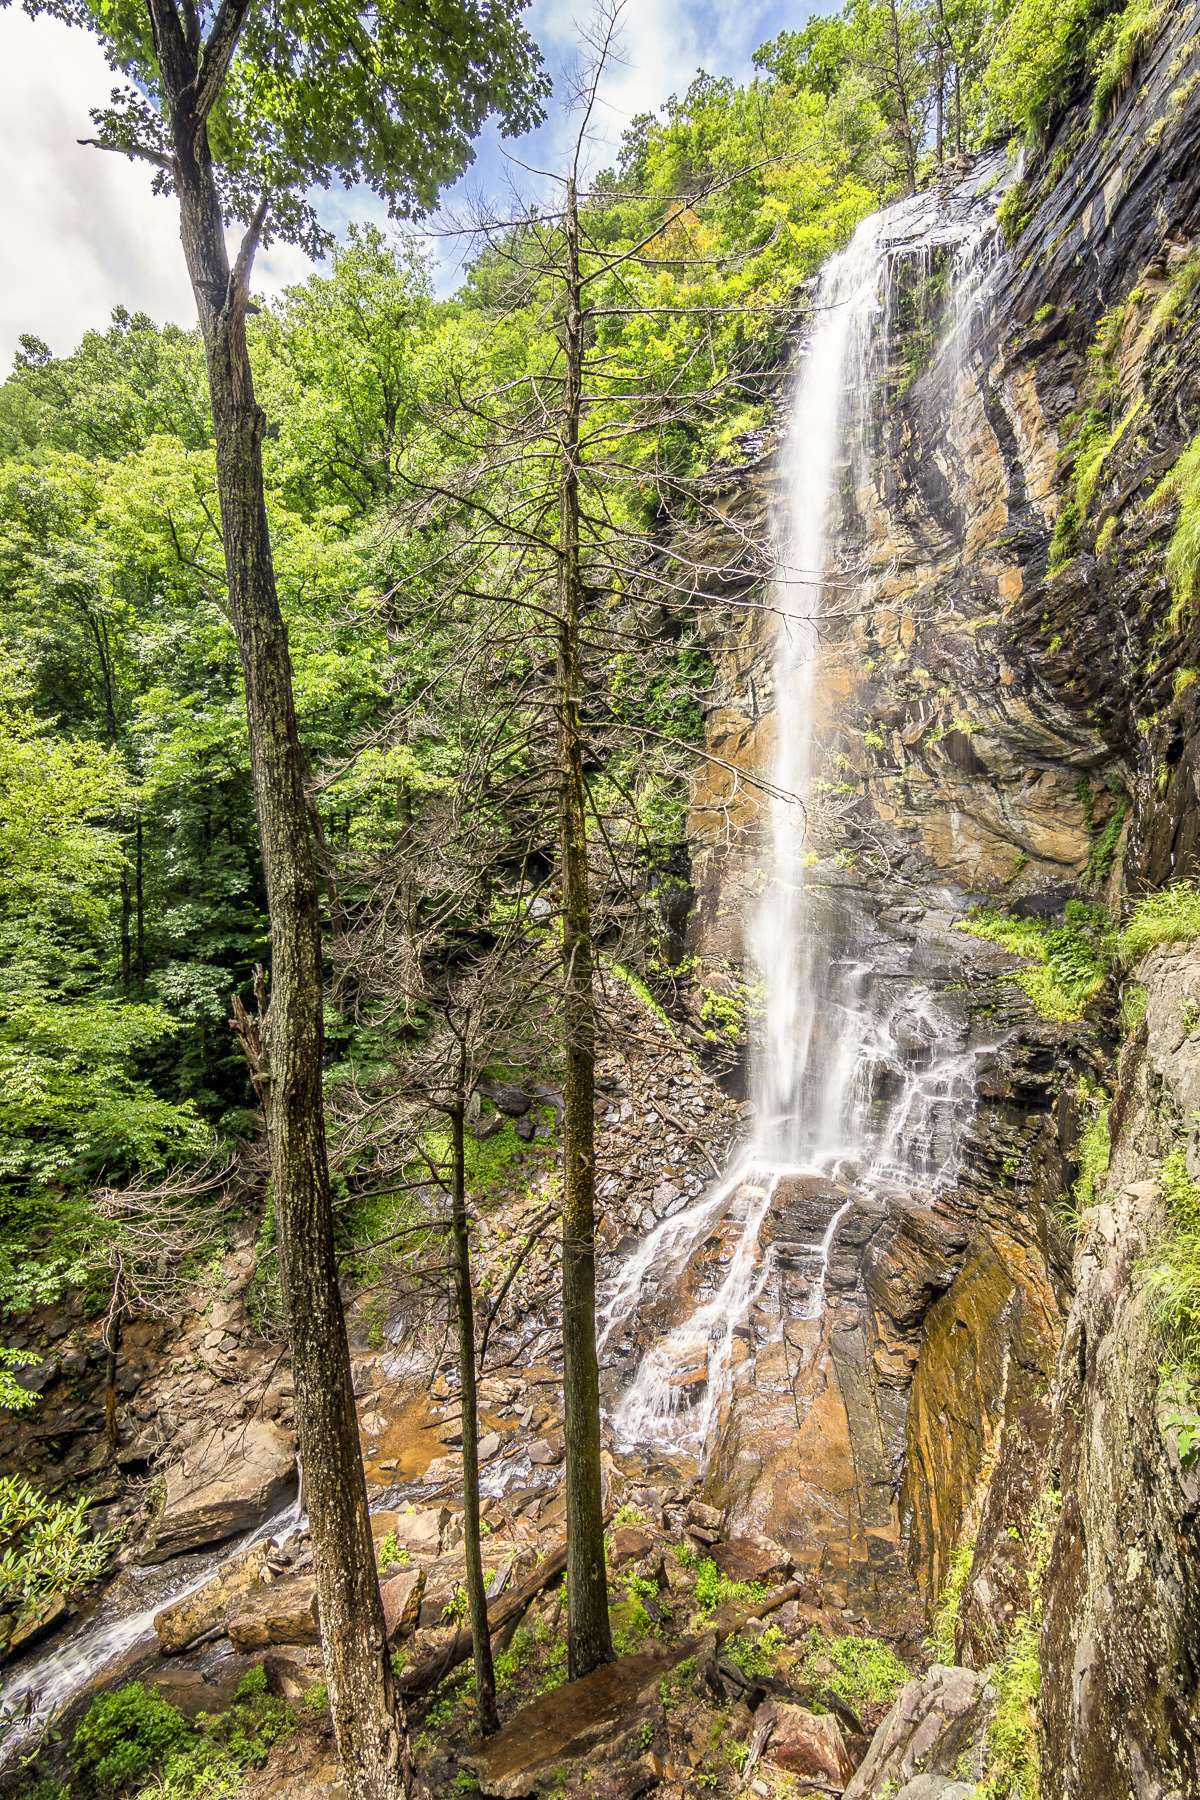 Finally, Rainbow Falls is located in Jones Gap State Park. The Rainbow Falls hiking trail is a 1.8 mile out-and-back trail located near Cleveland, S.C., that is rated as difficult. The trail is accessible from September until May.